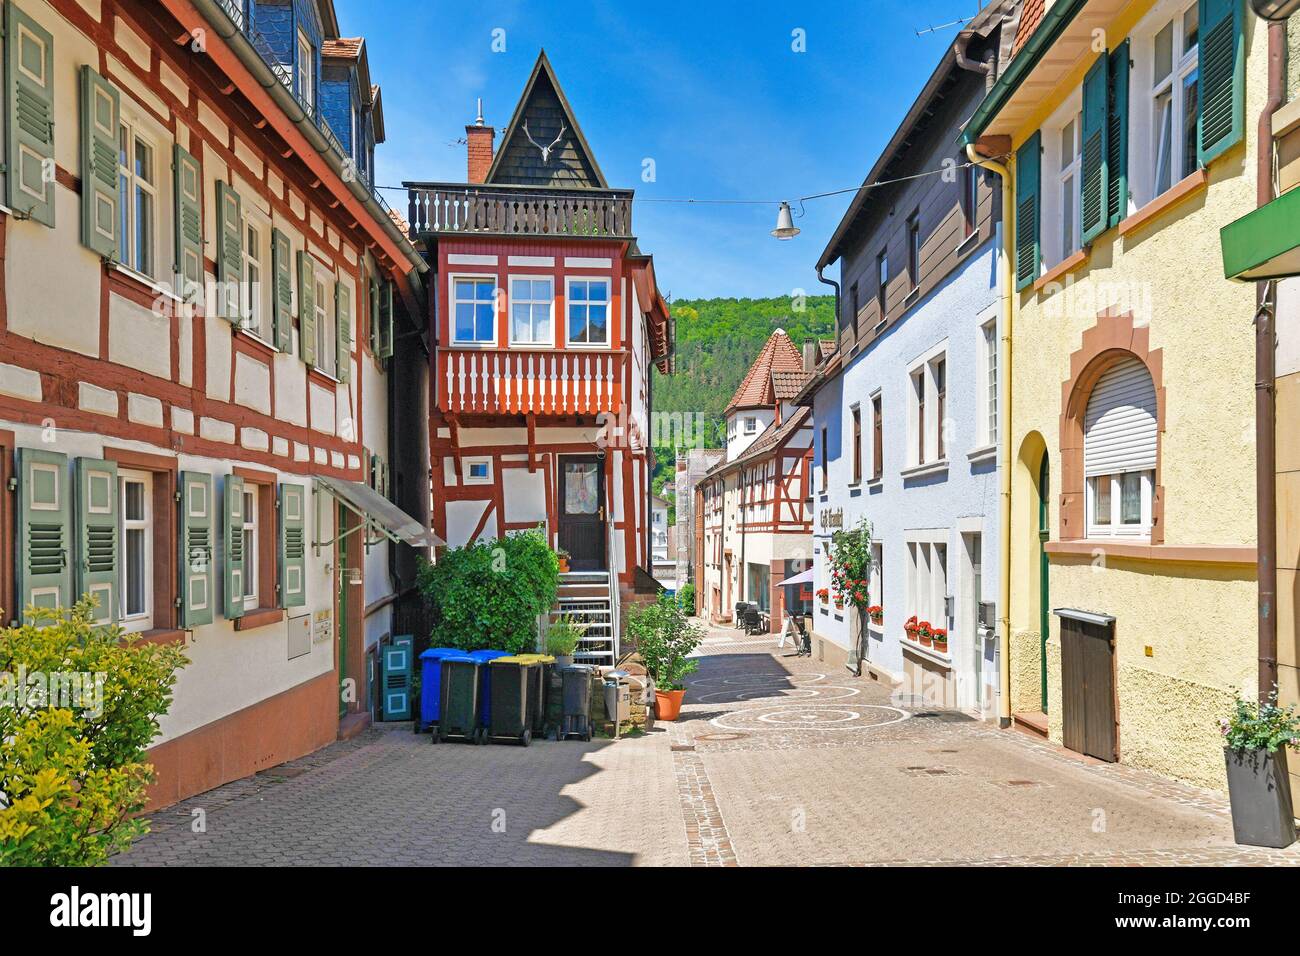 Mosbach, Germany - June 2021: Very narrow timber-framed house in historic town center Stock Photo